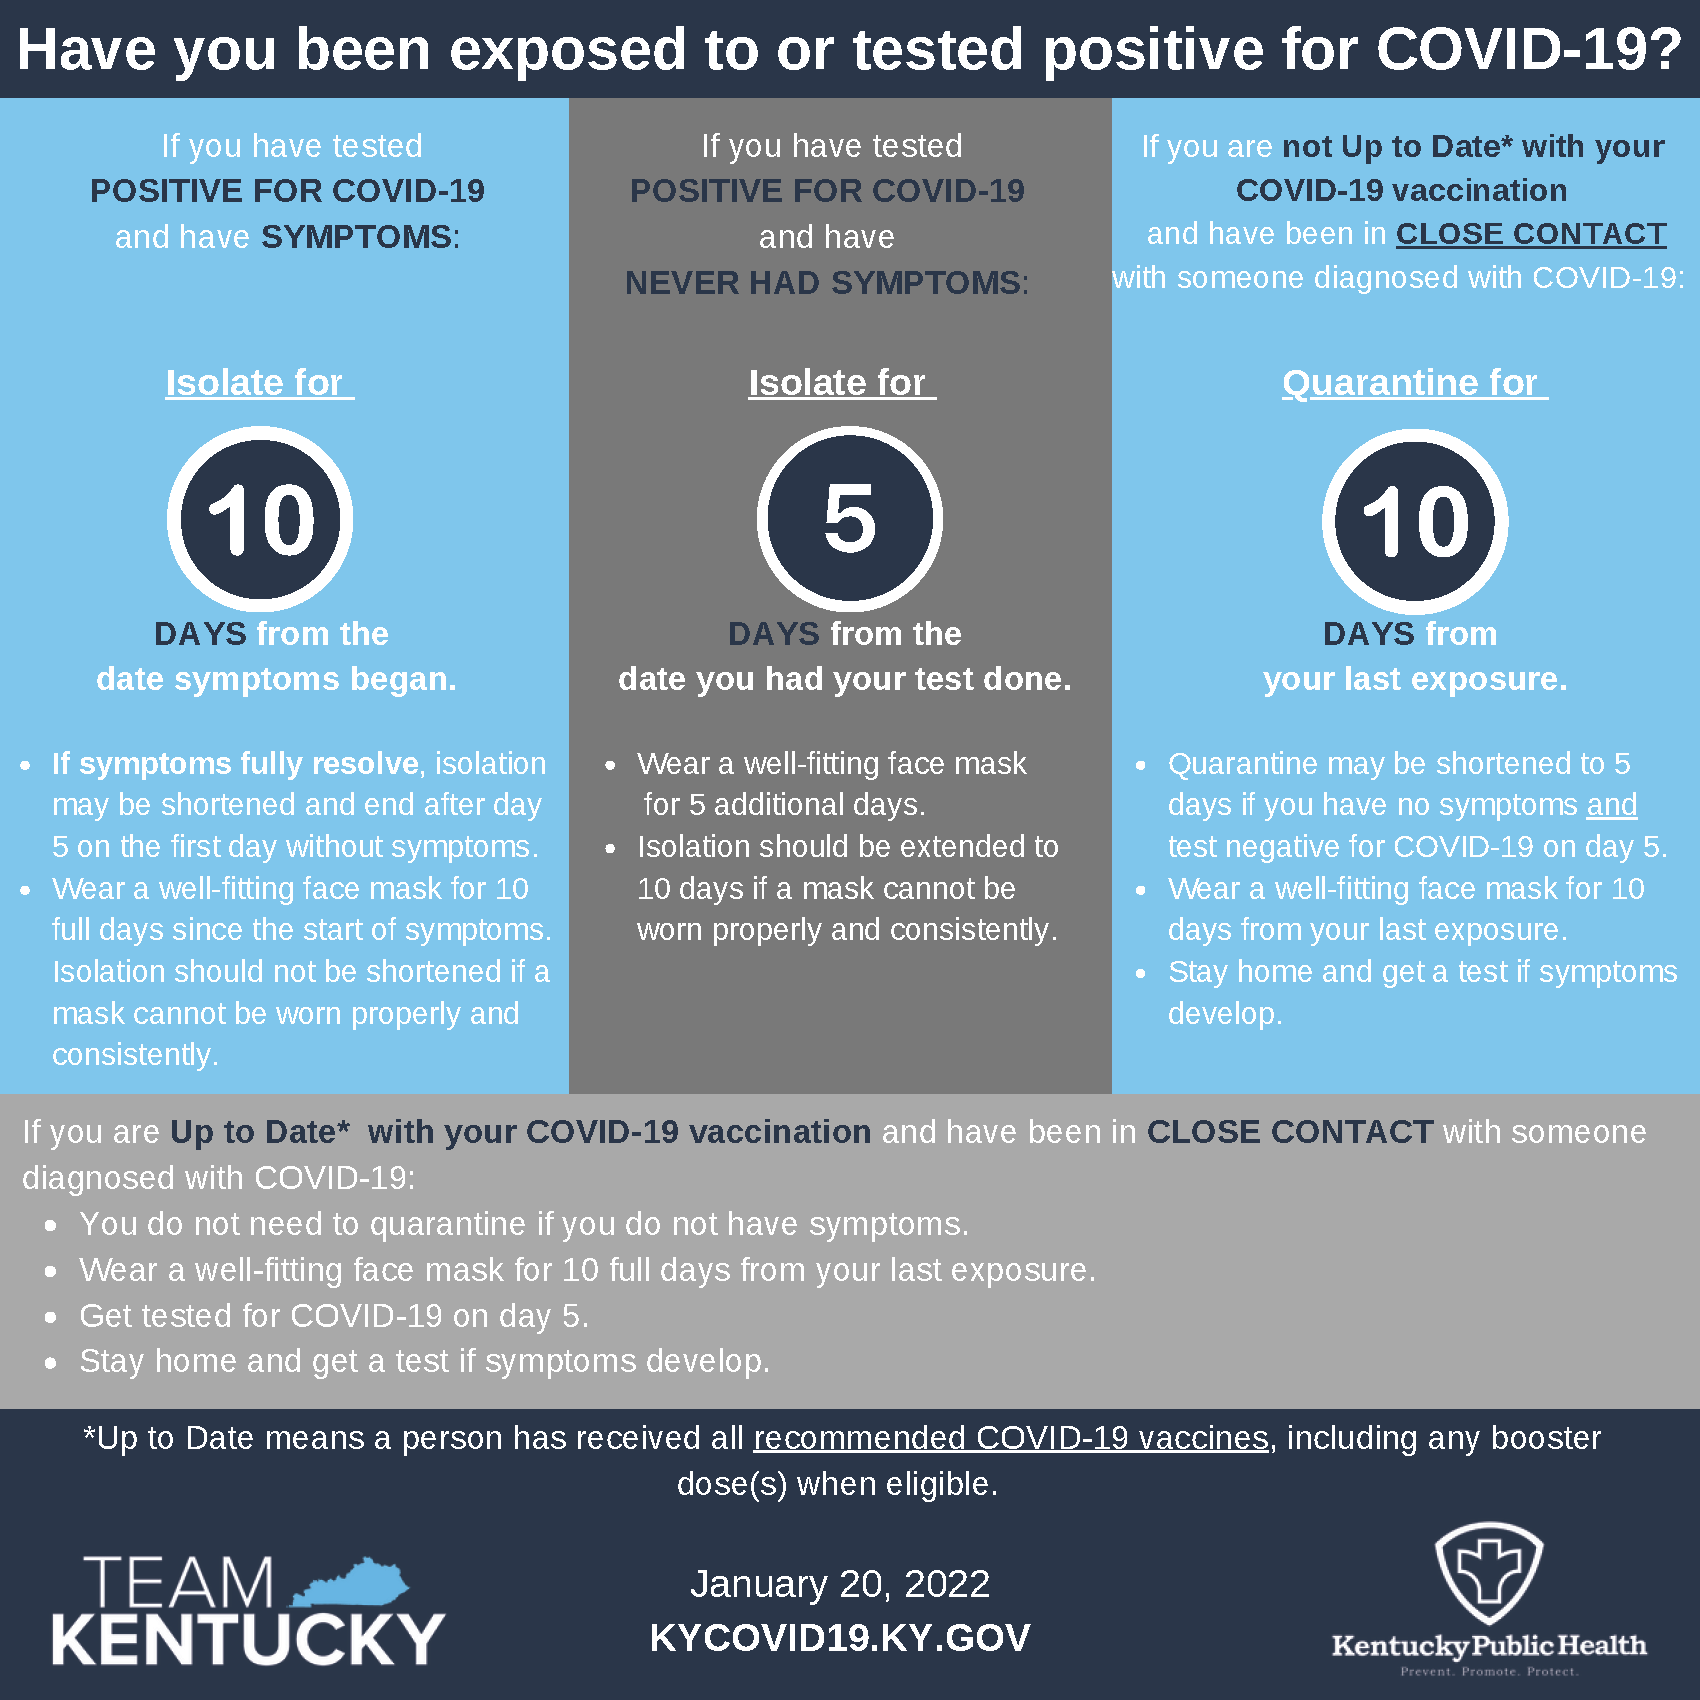 Have you been exposed to or tested positive for COVID-19?